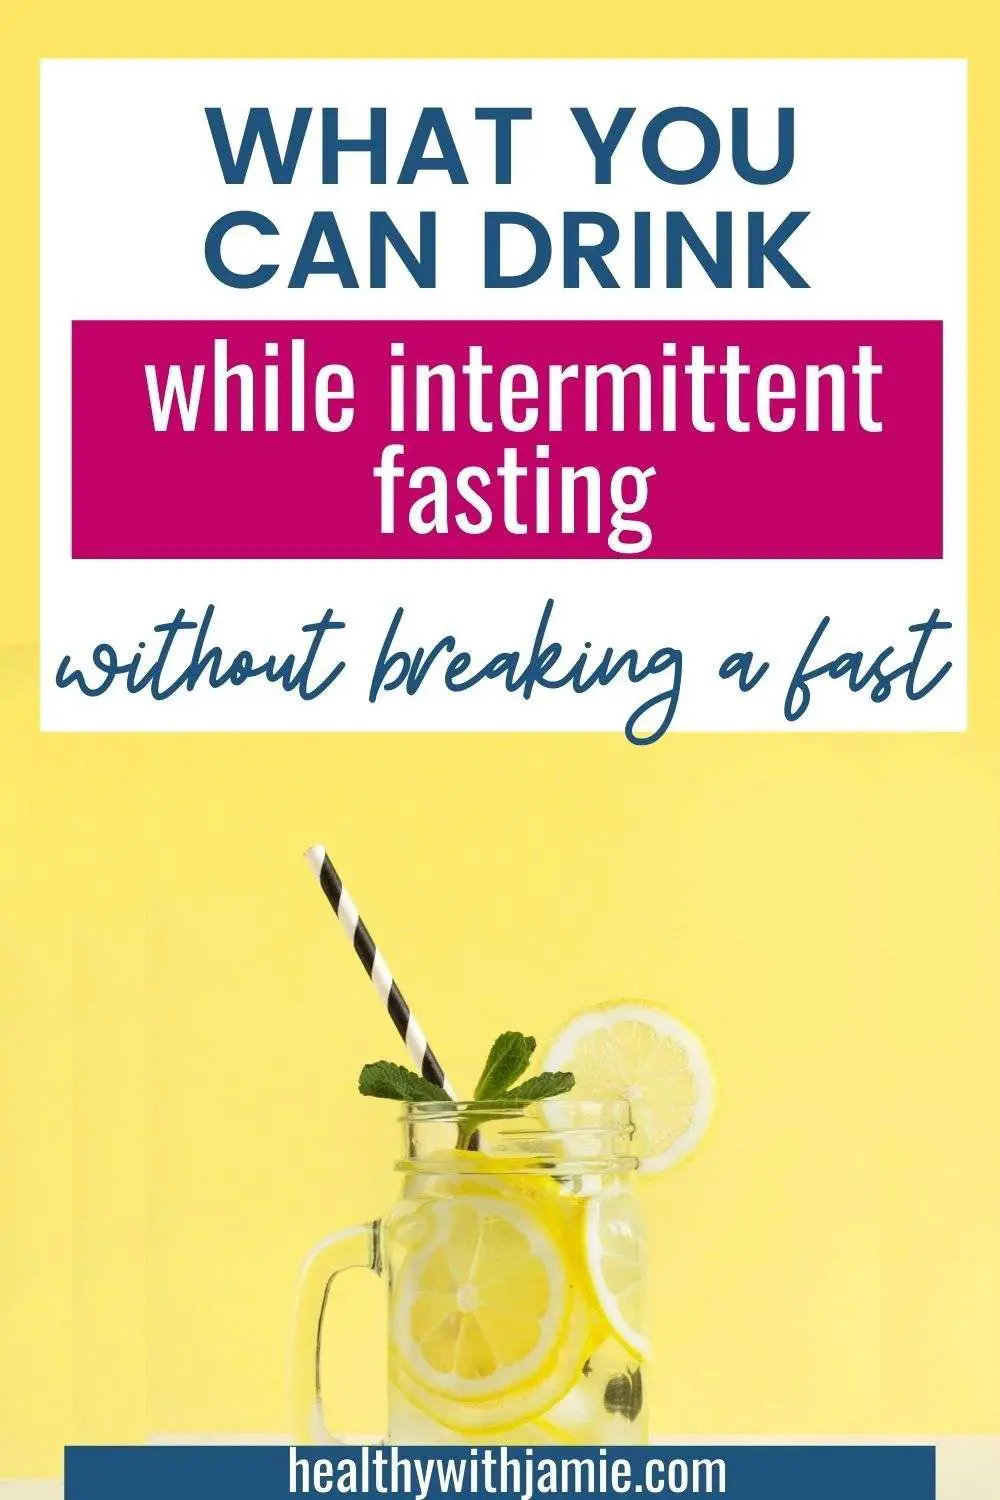 What Drinks Can I Drink While Fasting?